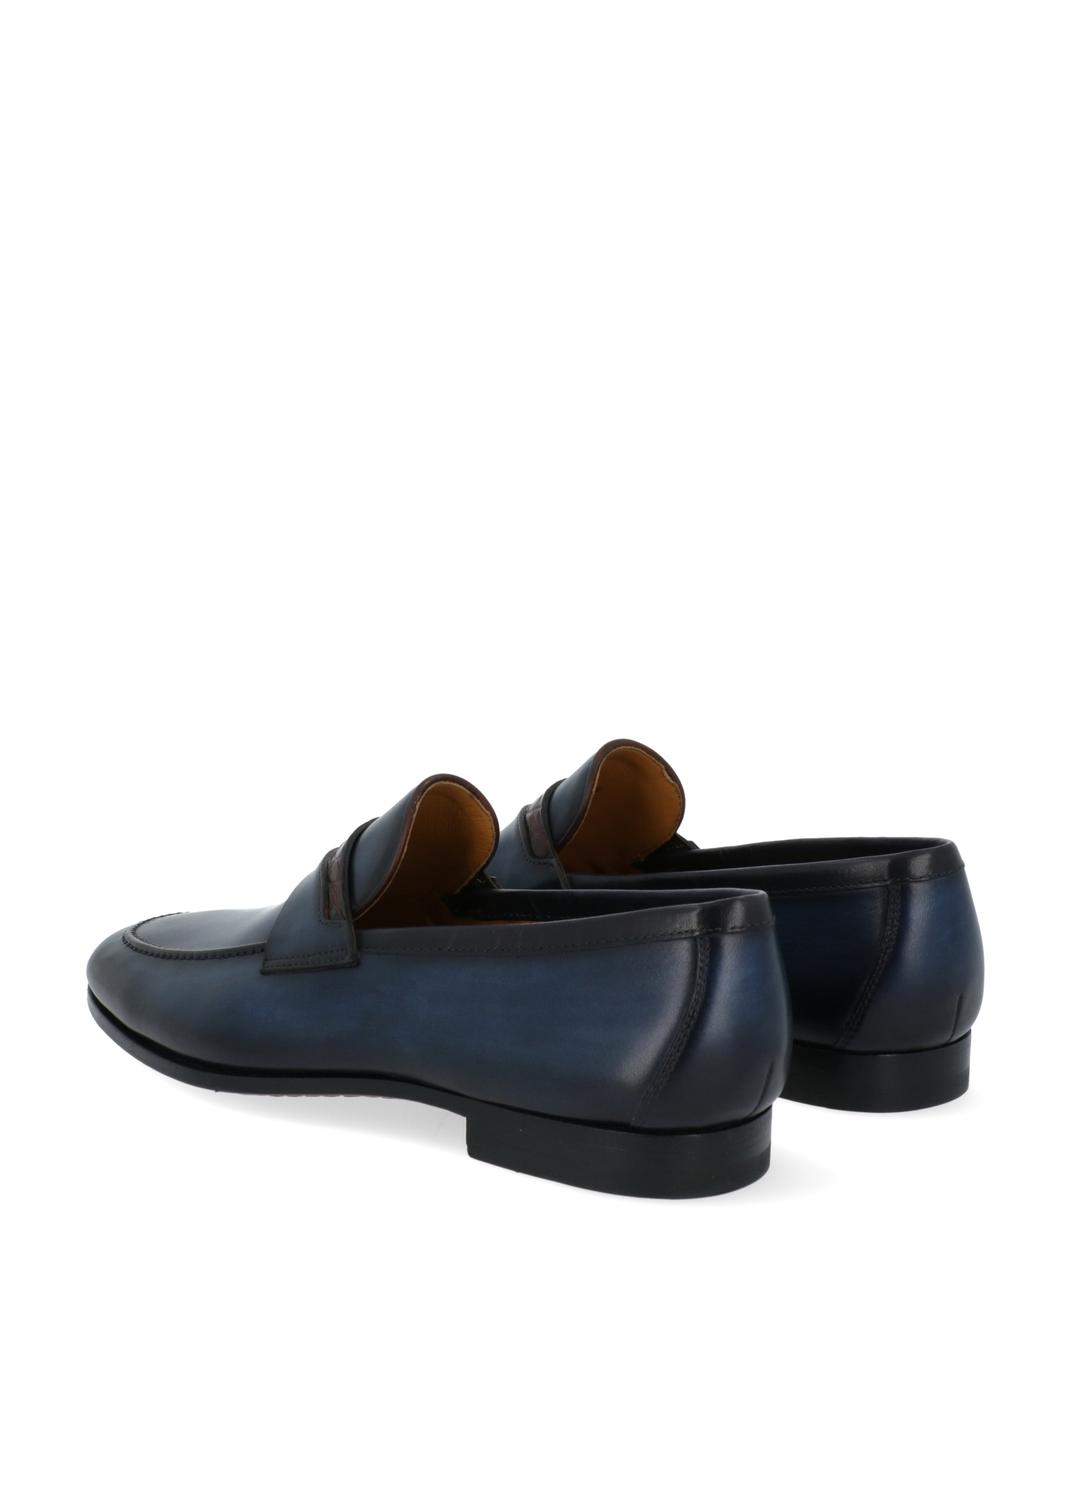 Magnanni loafers Sasso MGN-25063